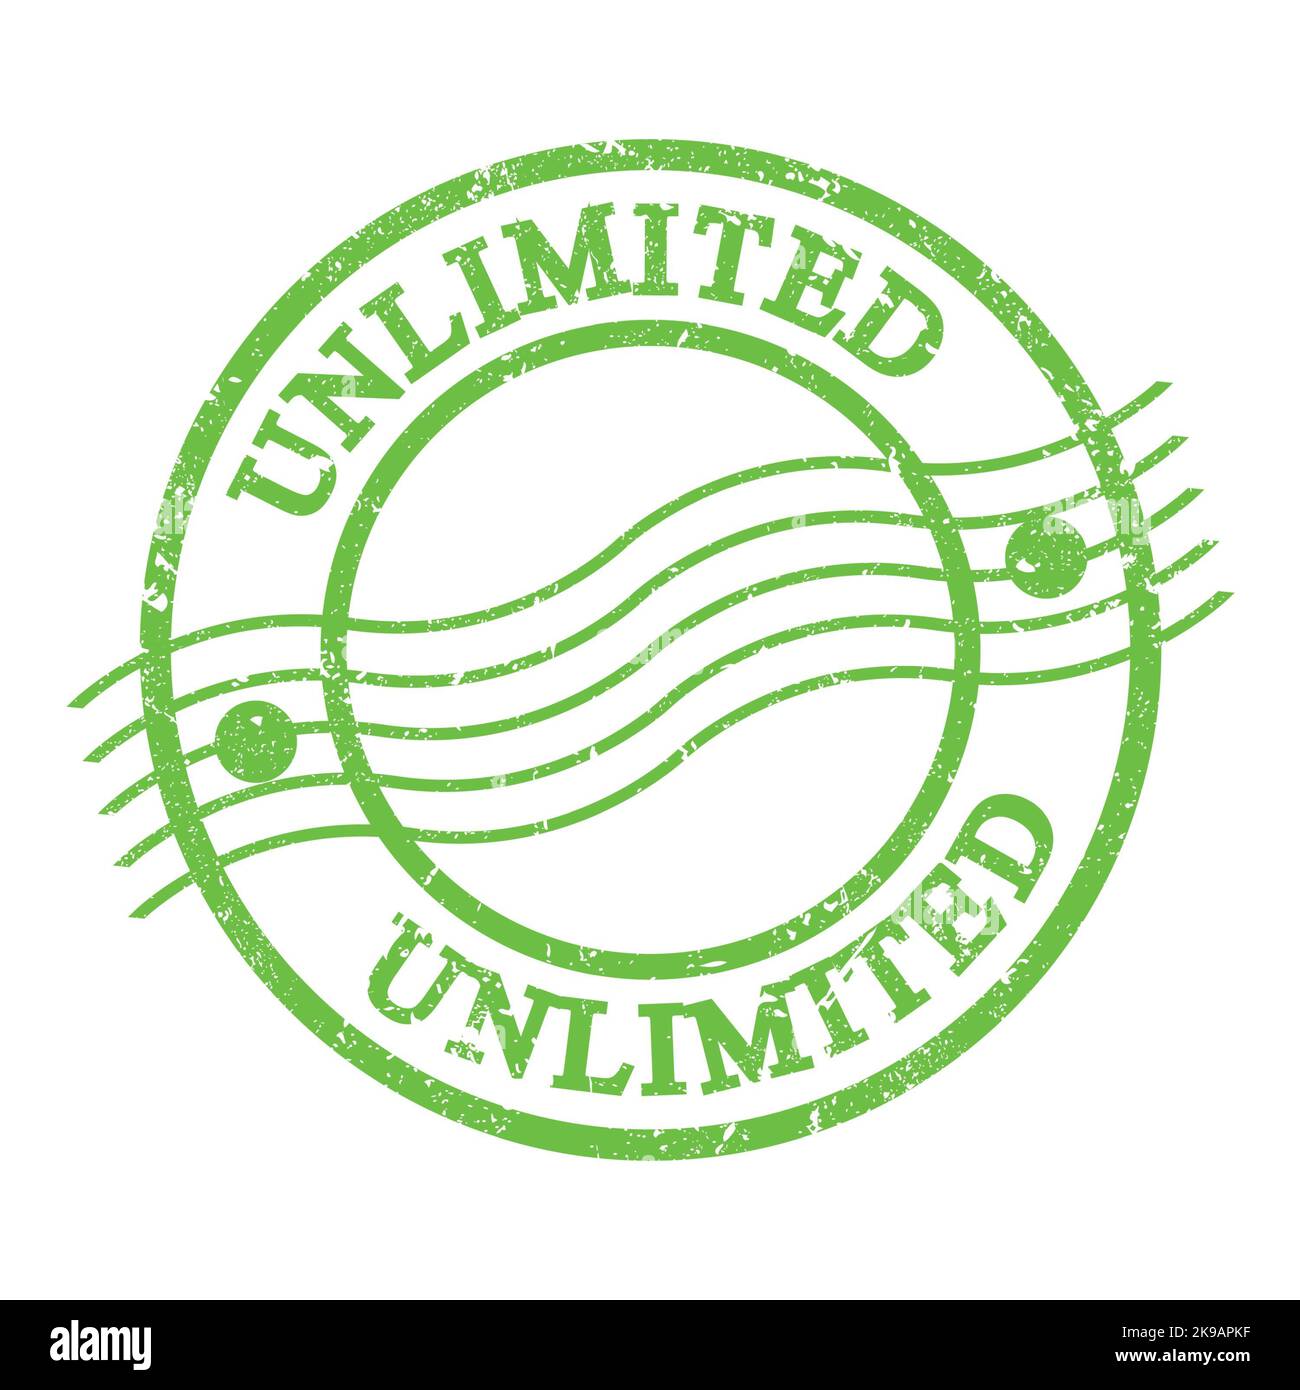 UNLIMITED, text written on green grungy postal stamp. Stock Photo